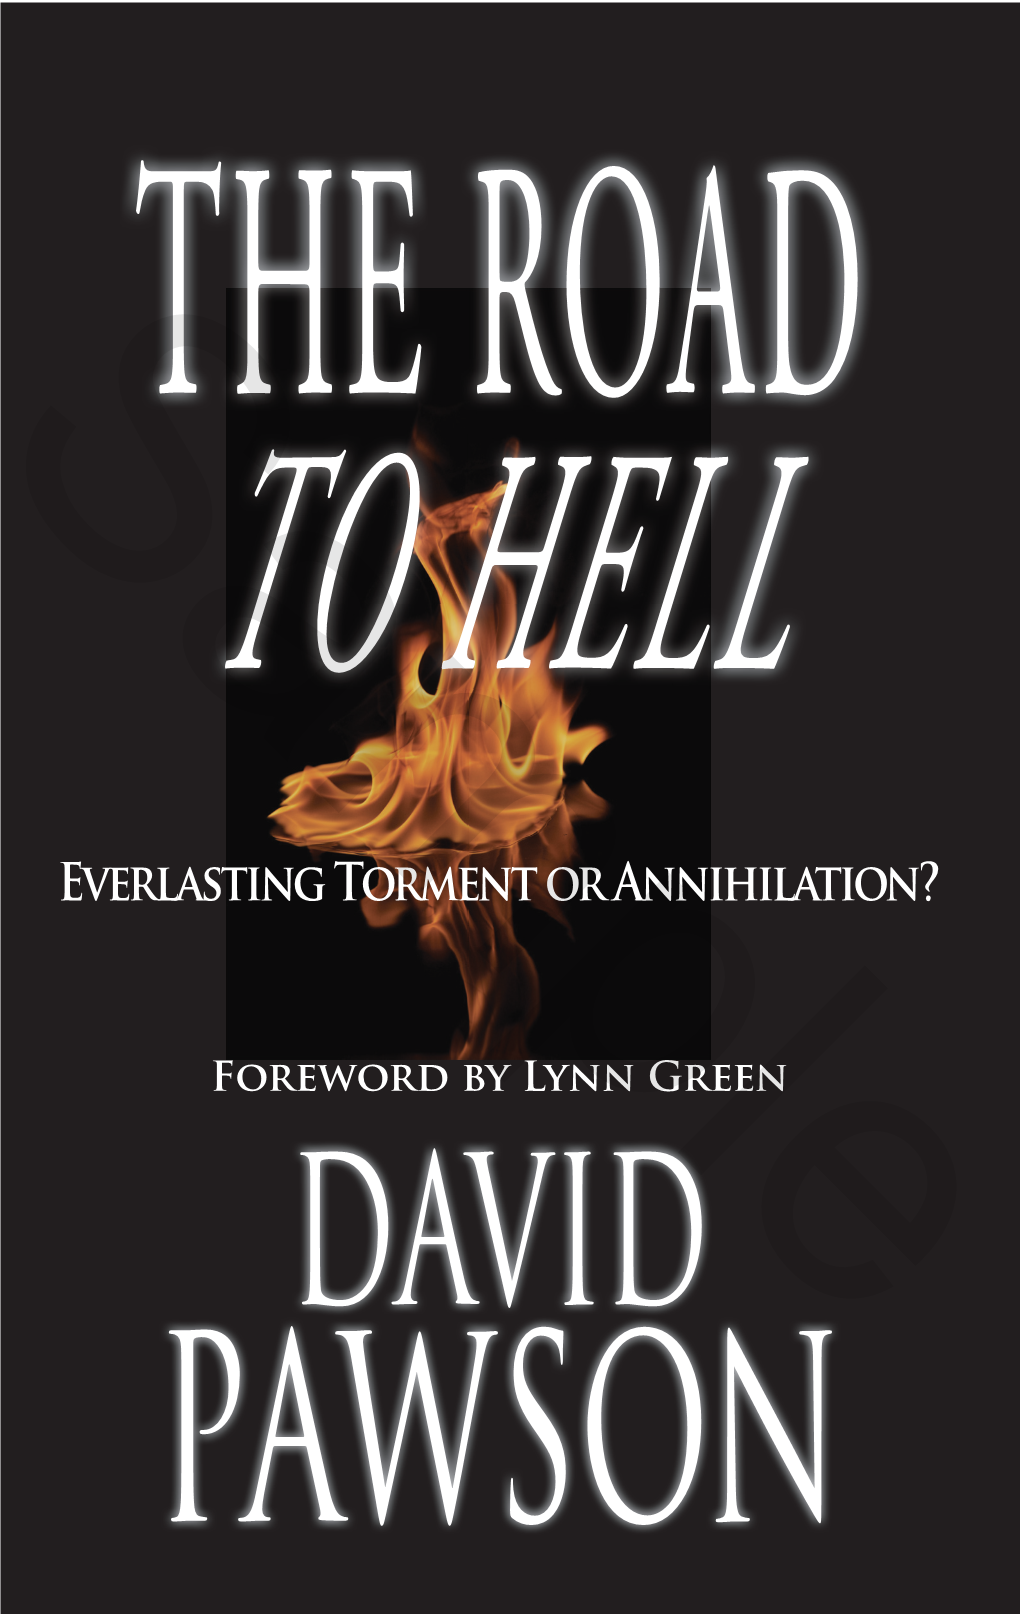 Road to Hell Interior 11212012.Indd